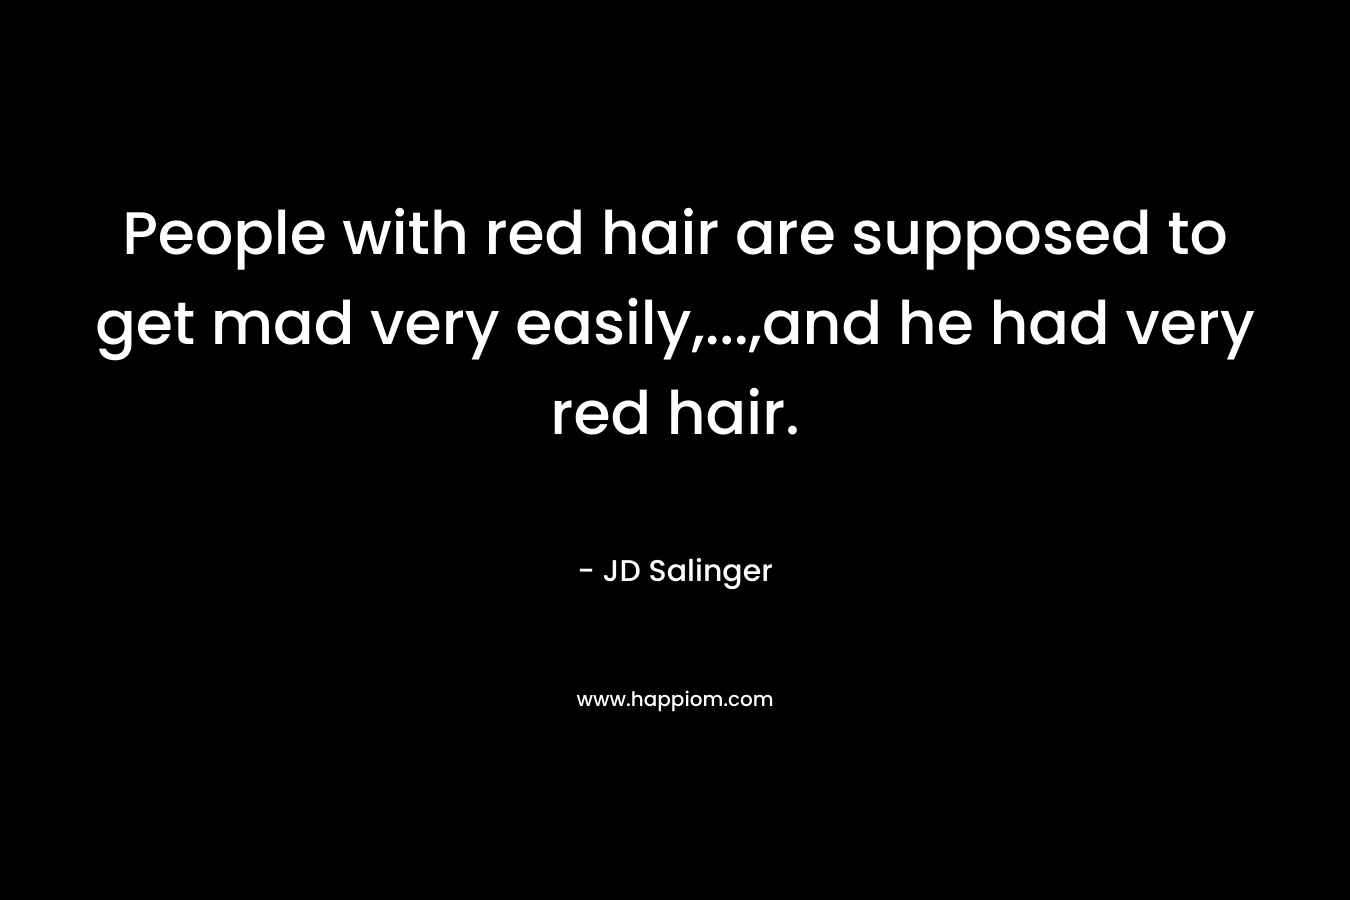 People with red hair are supposed to get mad very easily,…,and he had very red hair. – JD Salinger